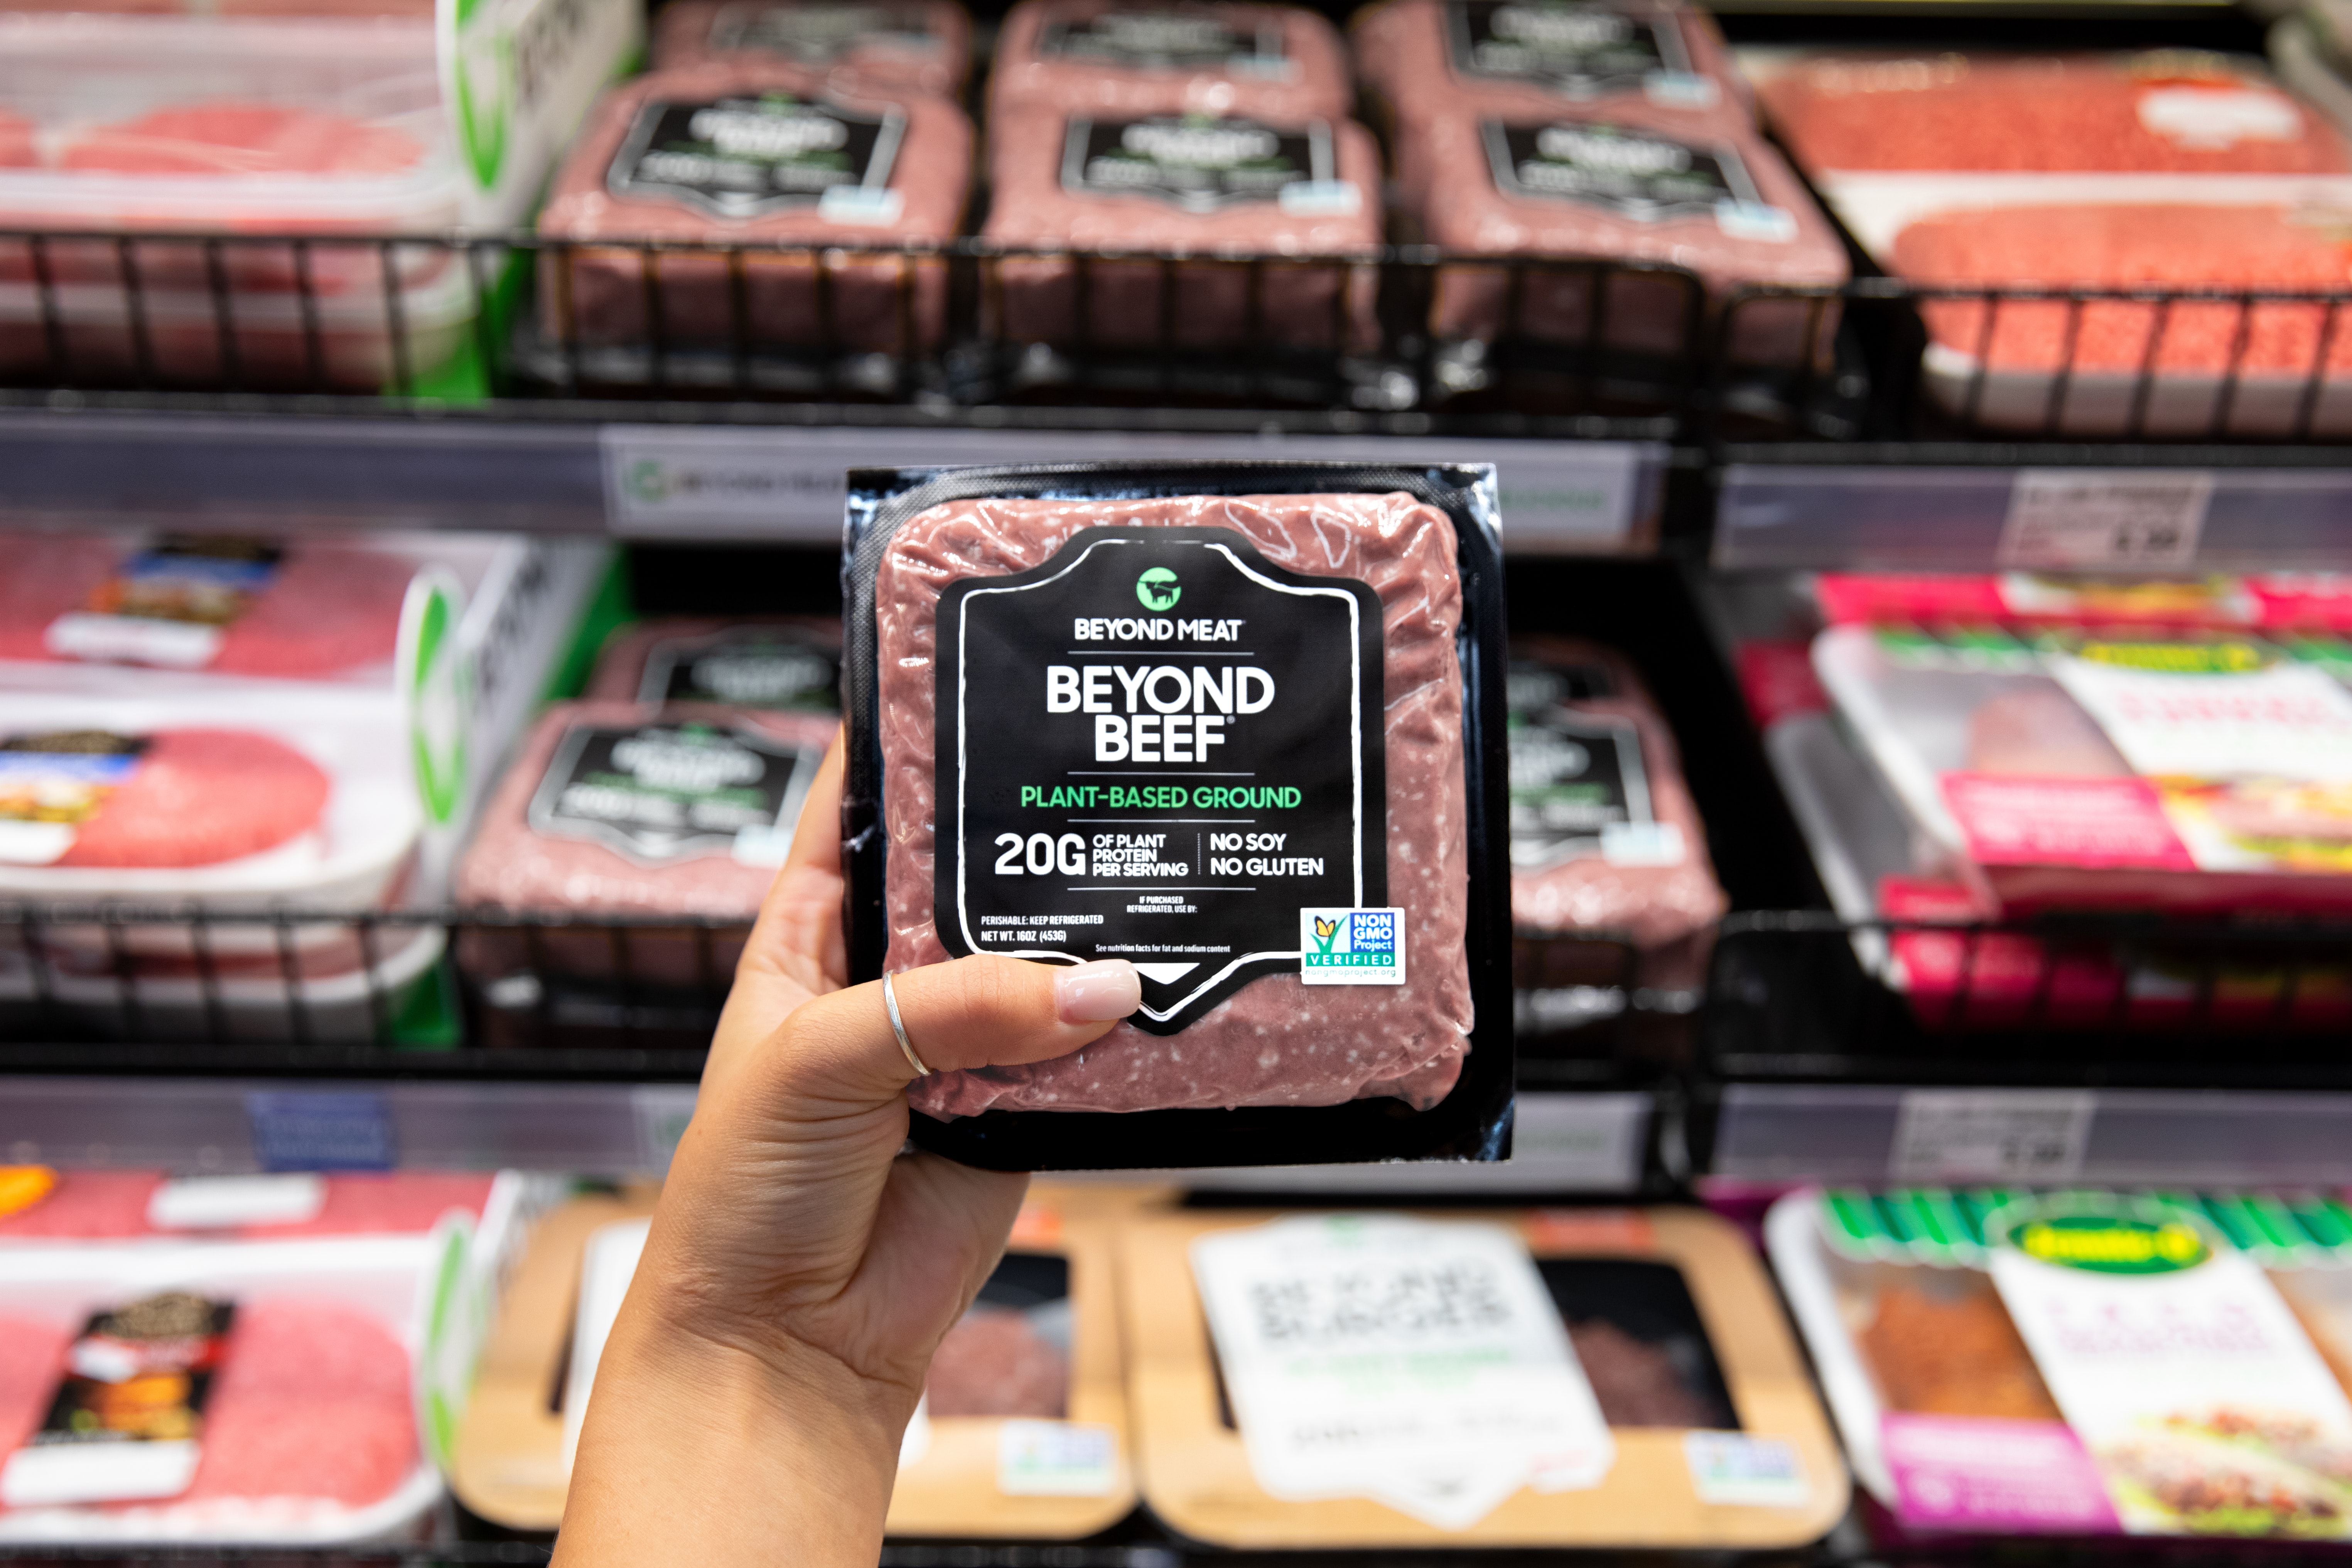 Plant-Based Private Labels Could Pummel Beyond Meat as Cargill Launches Competing Products